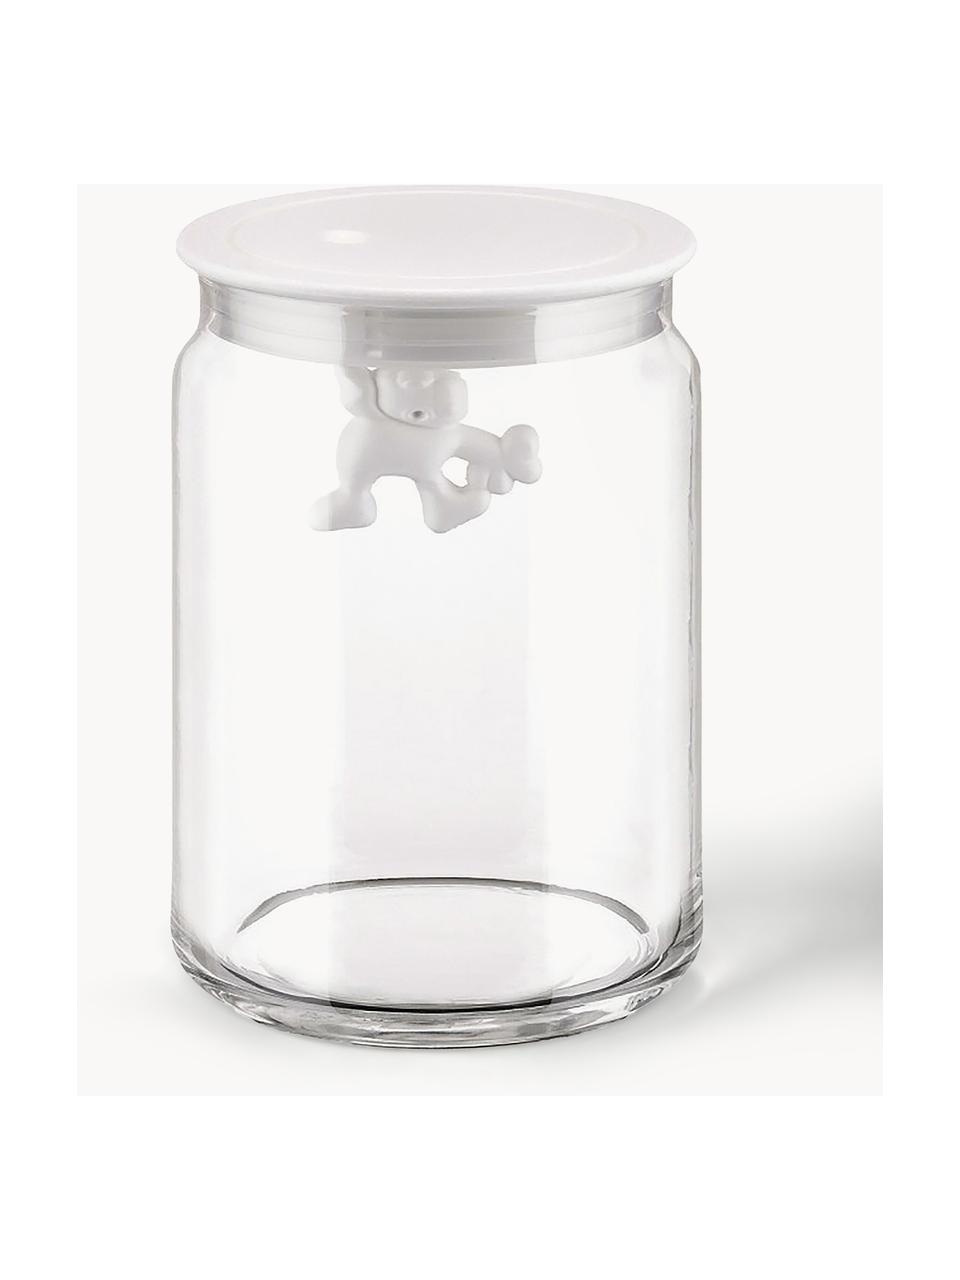 Opbergpot Gianni, H 12 cm, Glas, thermoplastische hars, Wit, transparant, Ø 11 x H 12 cm